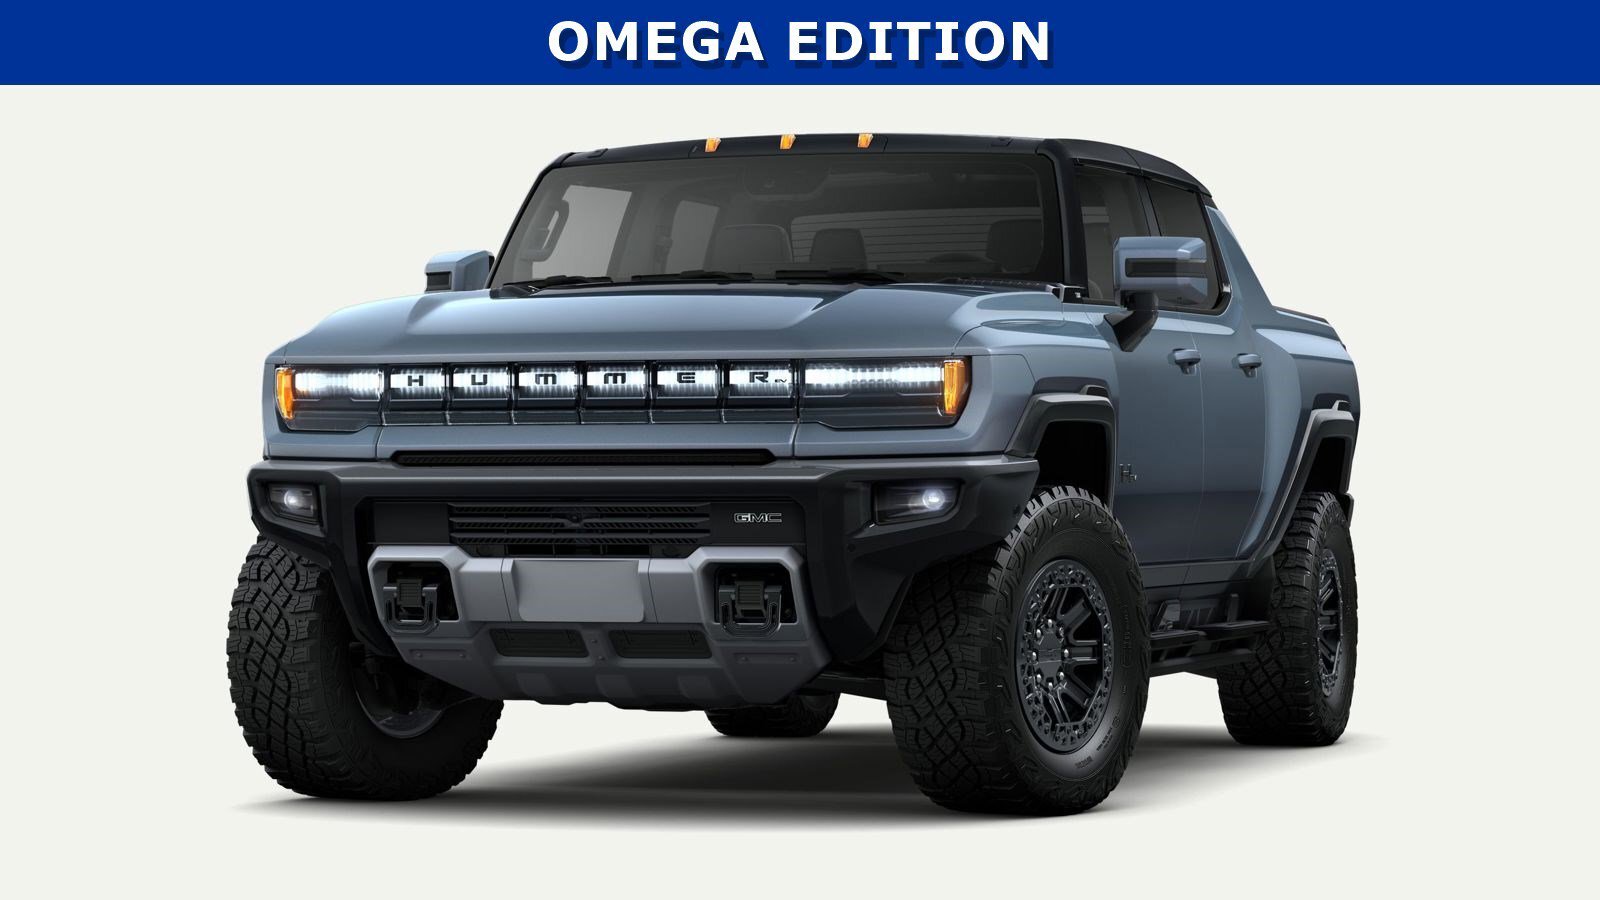 2024 GMC HUMMER EV Pickup 3X Omega Edition - Extreme Off-Road Package 4x4 Su